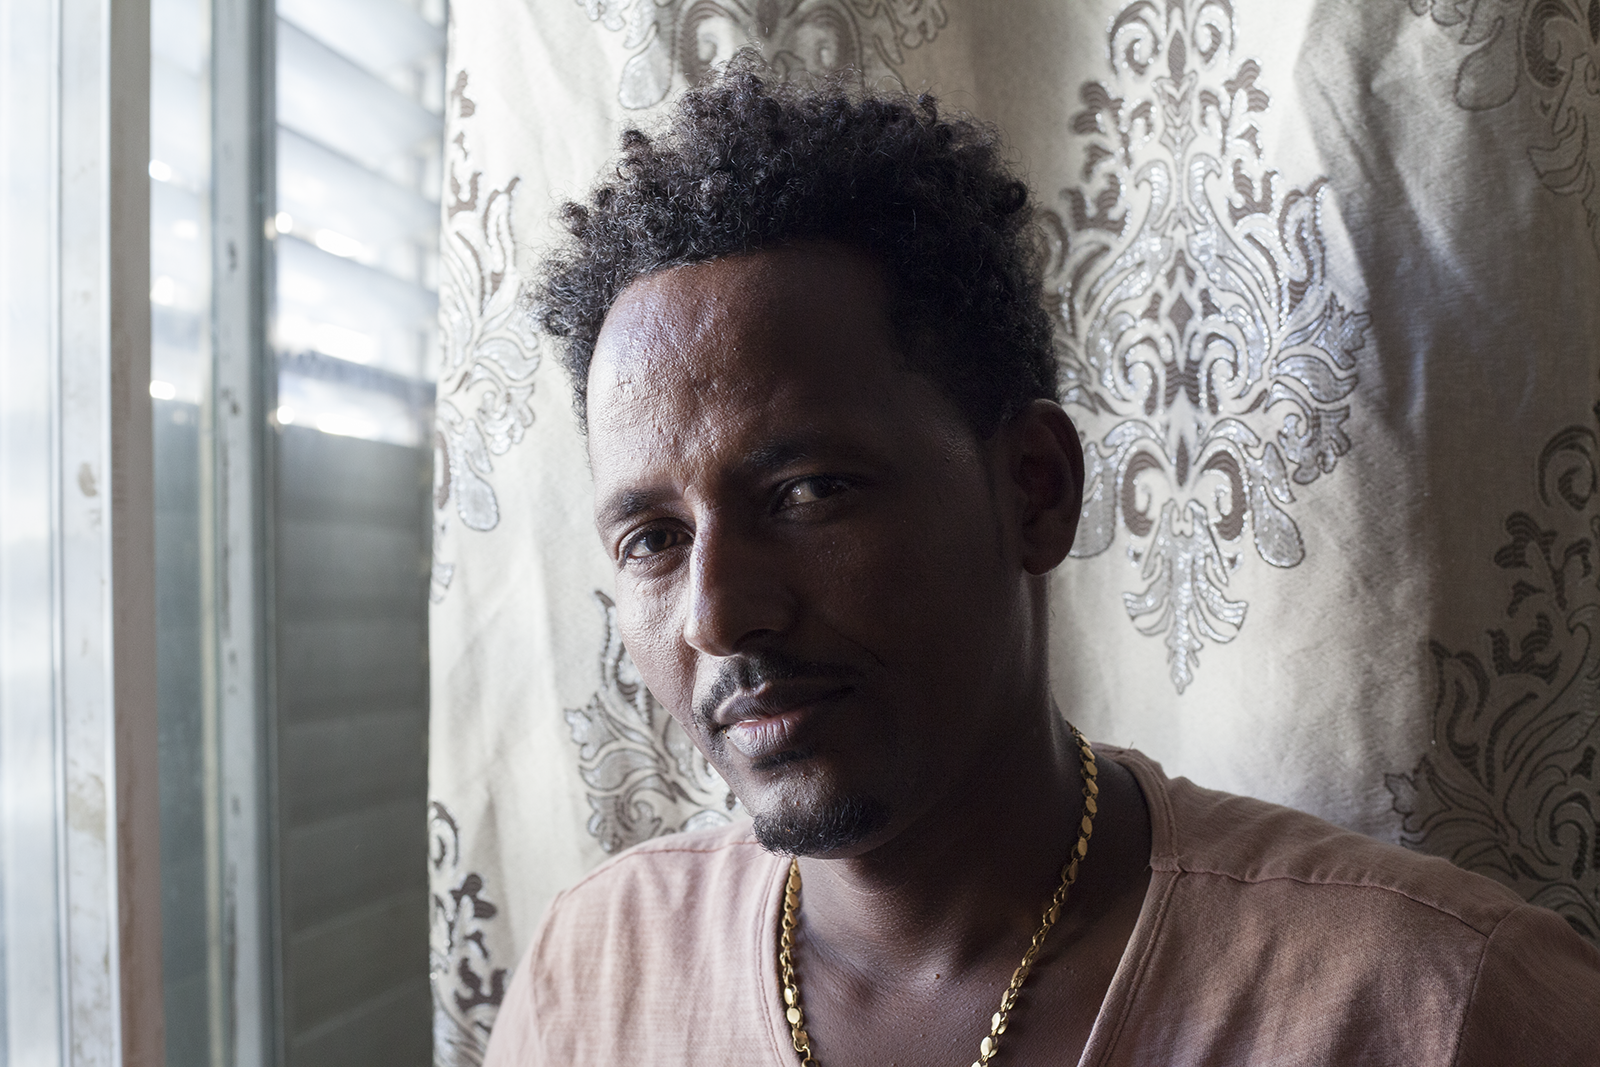 Mesgena (who chose to withhold his last name for privacy reasons), was an asylum seeker from Eritrea living with his wife and four small children in a one bedroom apartment in Tel Aviv. A victim of torture when crossing the Sinai to reach Israel, he was able to receive refugee status in Canada. He and his family were relocated to Toronto in late July. Image by Caron Creighton. Israel, 2018.